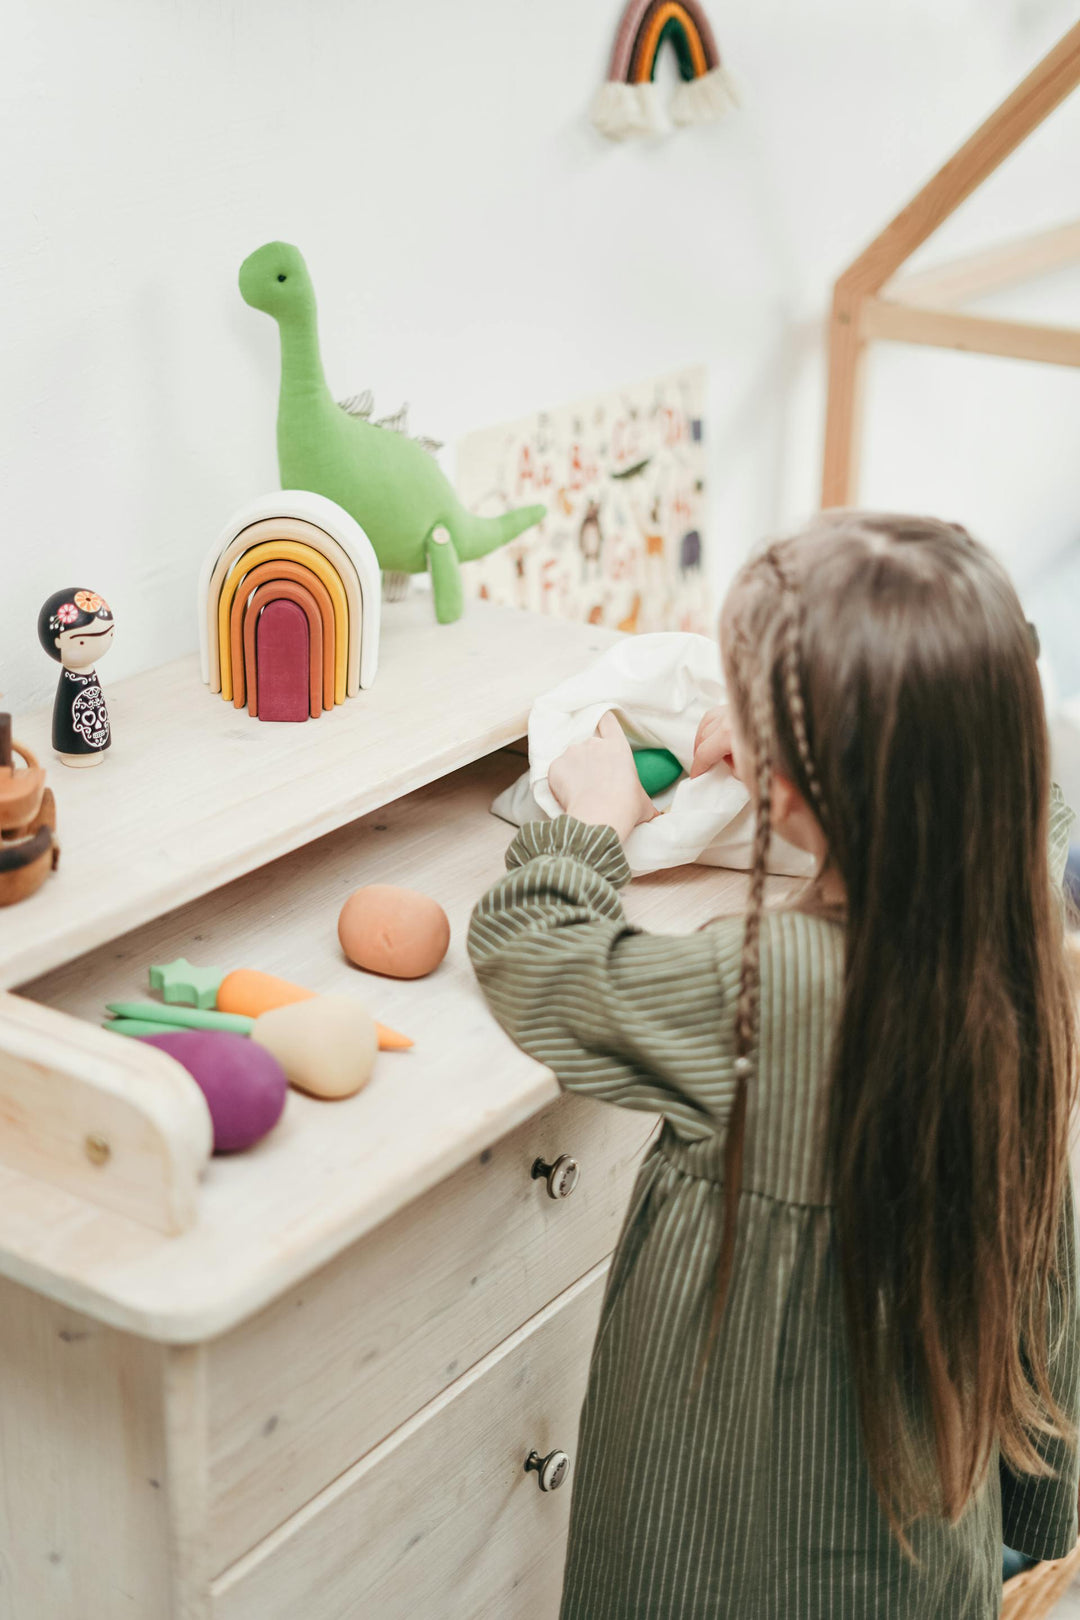 Kids' Room Magic: Designing Fun and Functional Spaces